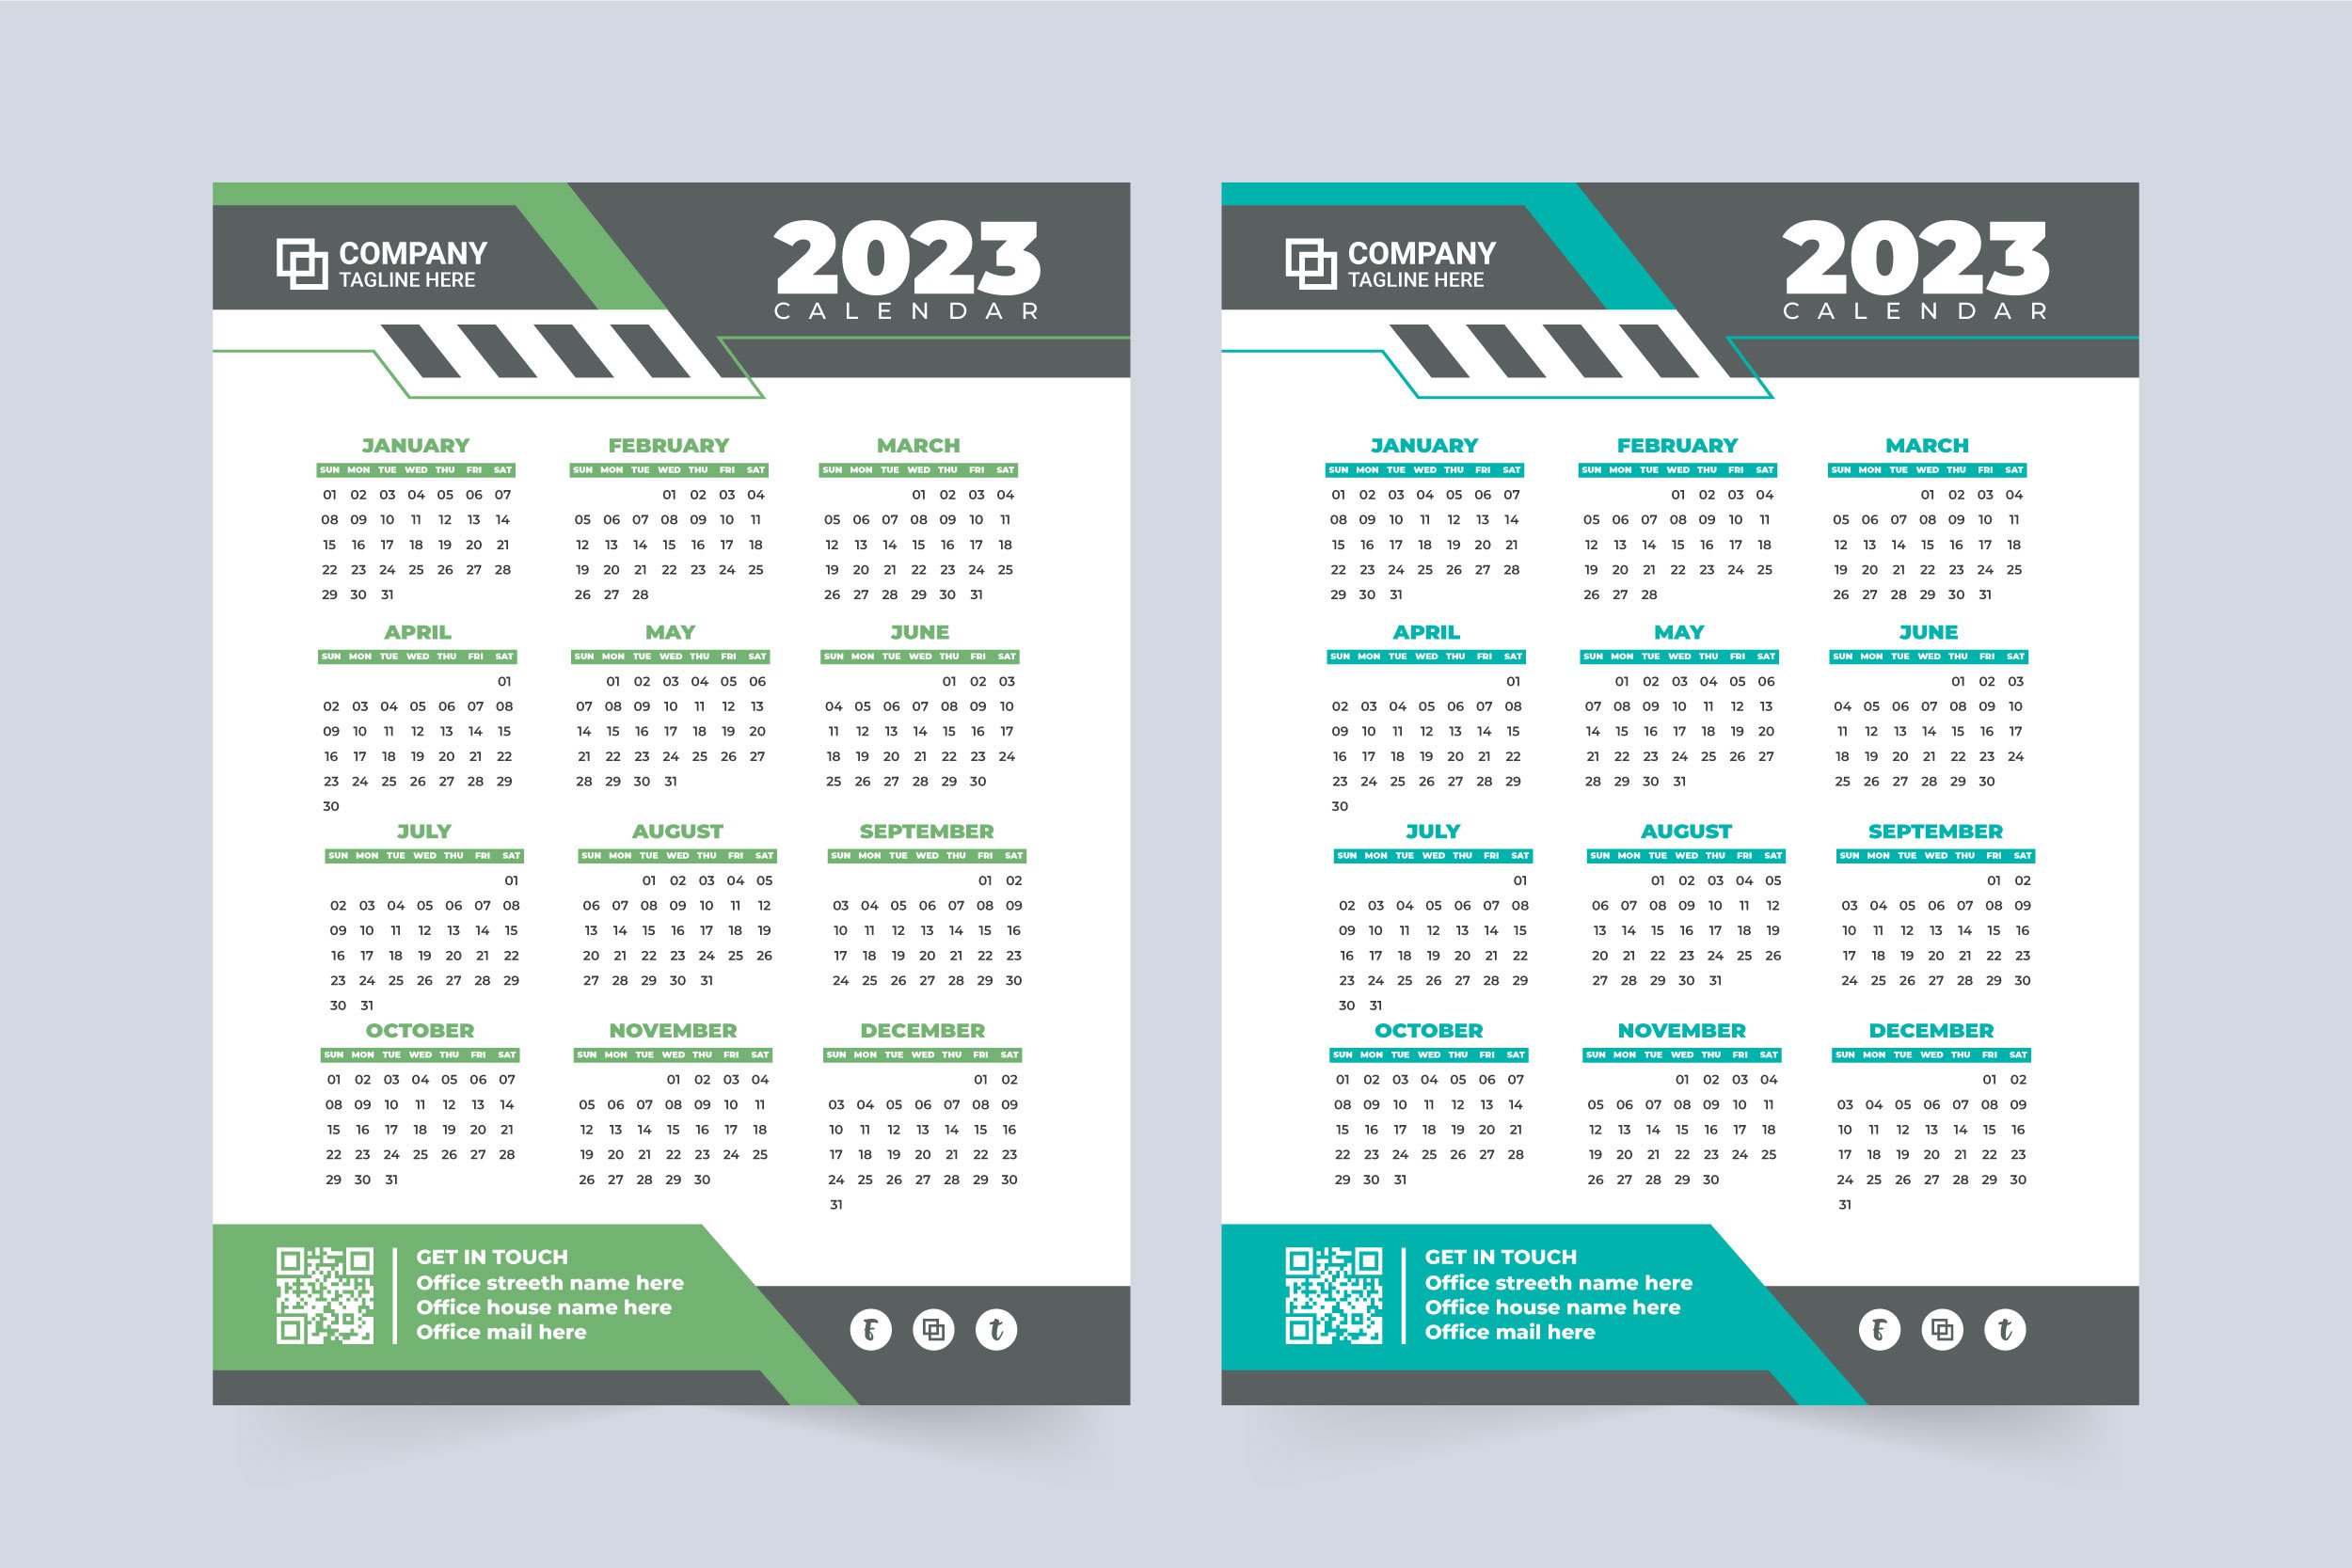 2023 yearly calendar template vector by Iftikhar Alam on Dribbble